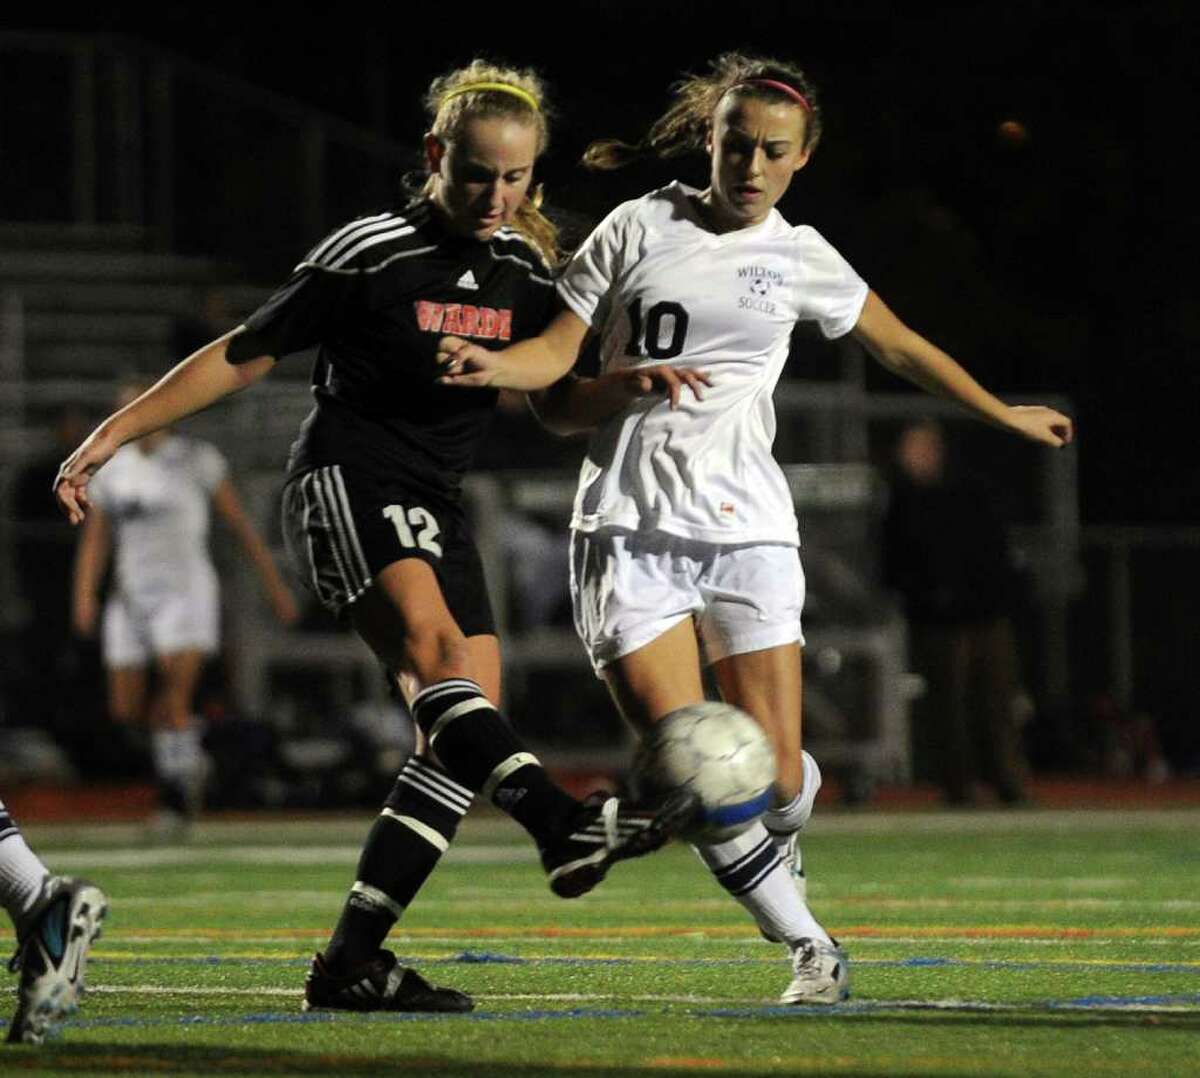 Fairfield Warde's #12 Maggie Allen, left, gets to the ball before Wilton's #10 Lindsay Knutson, during FCIAC girls' soccer semi-finals action in Norwalk, Conn. on Thursday November 3, 2011.